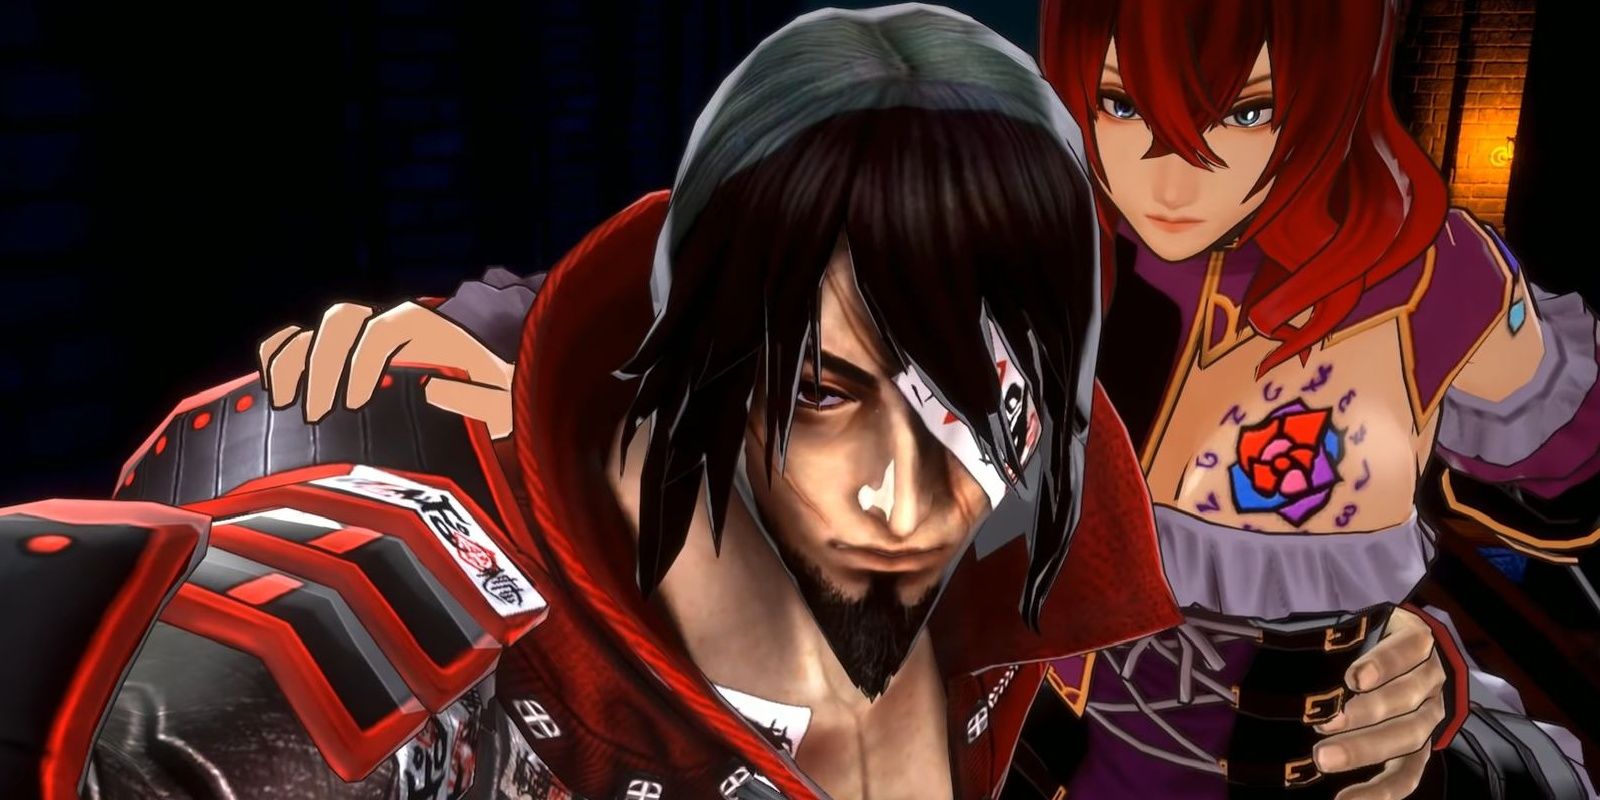 Zangetsu carrying Miriam in Bloodstained: Ritual of the Night